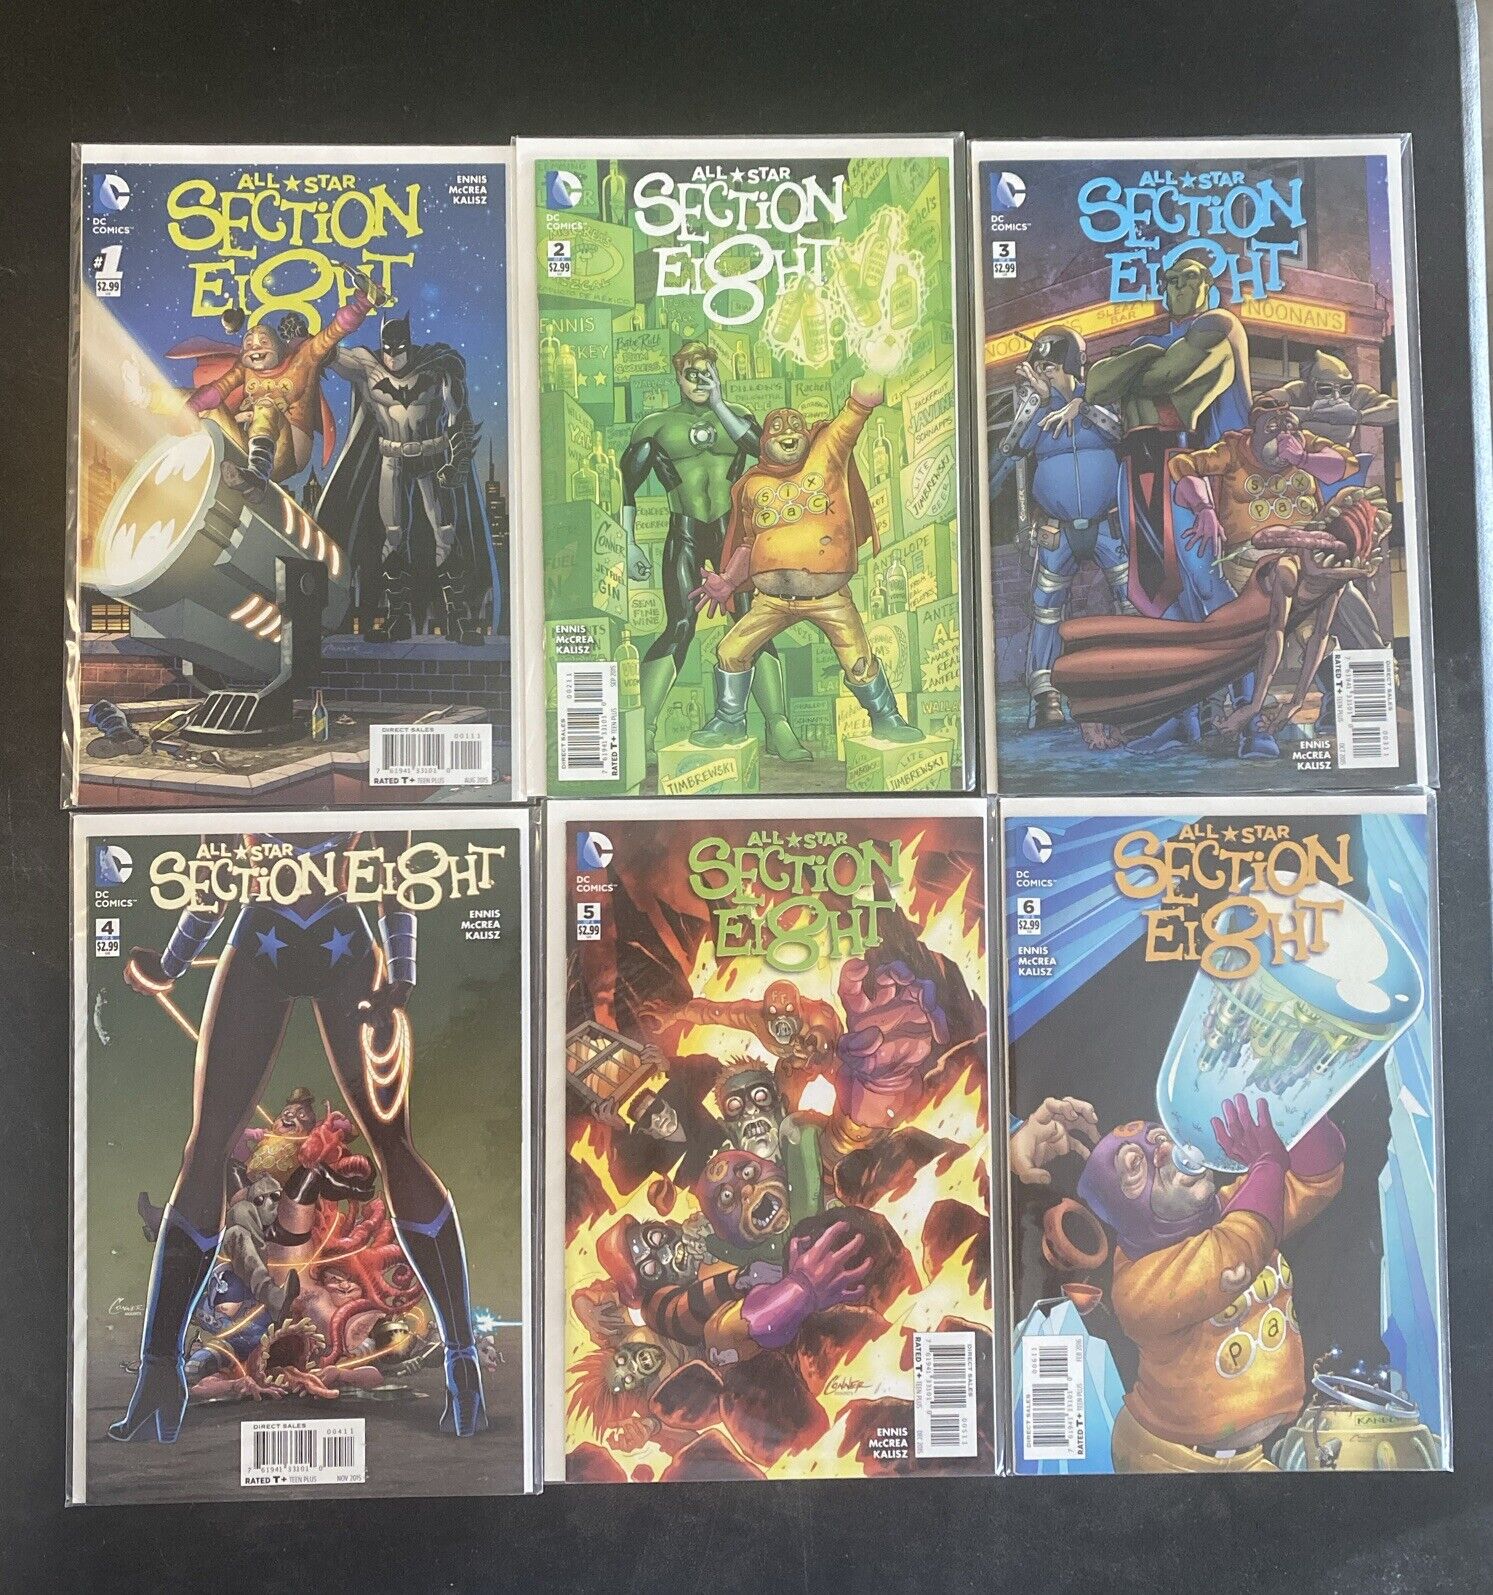 All-Star Section Eight #1-6 COMPLETE RUN (2015) NM